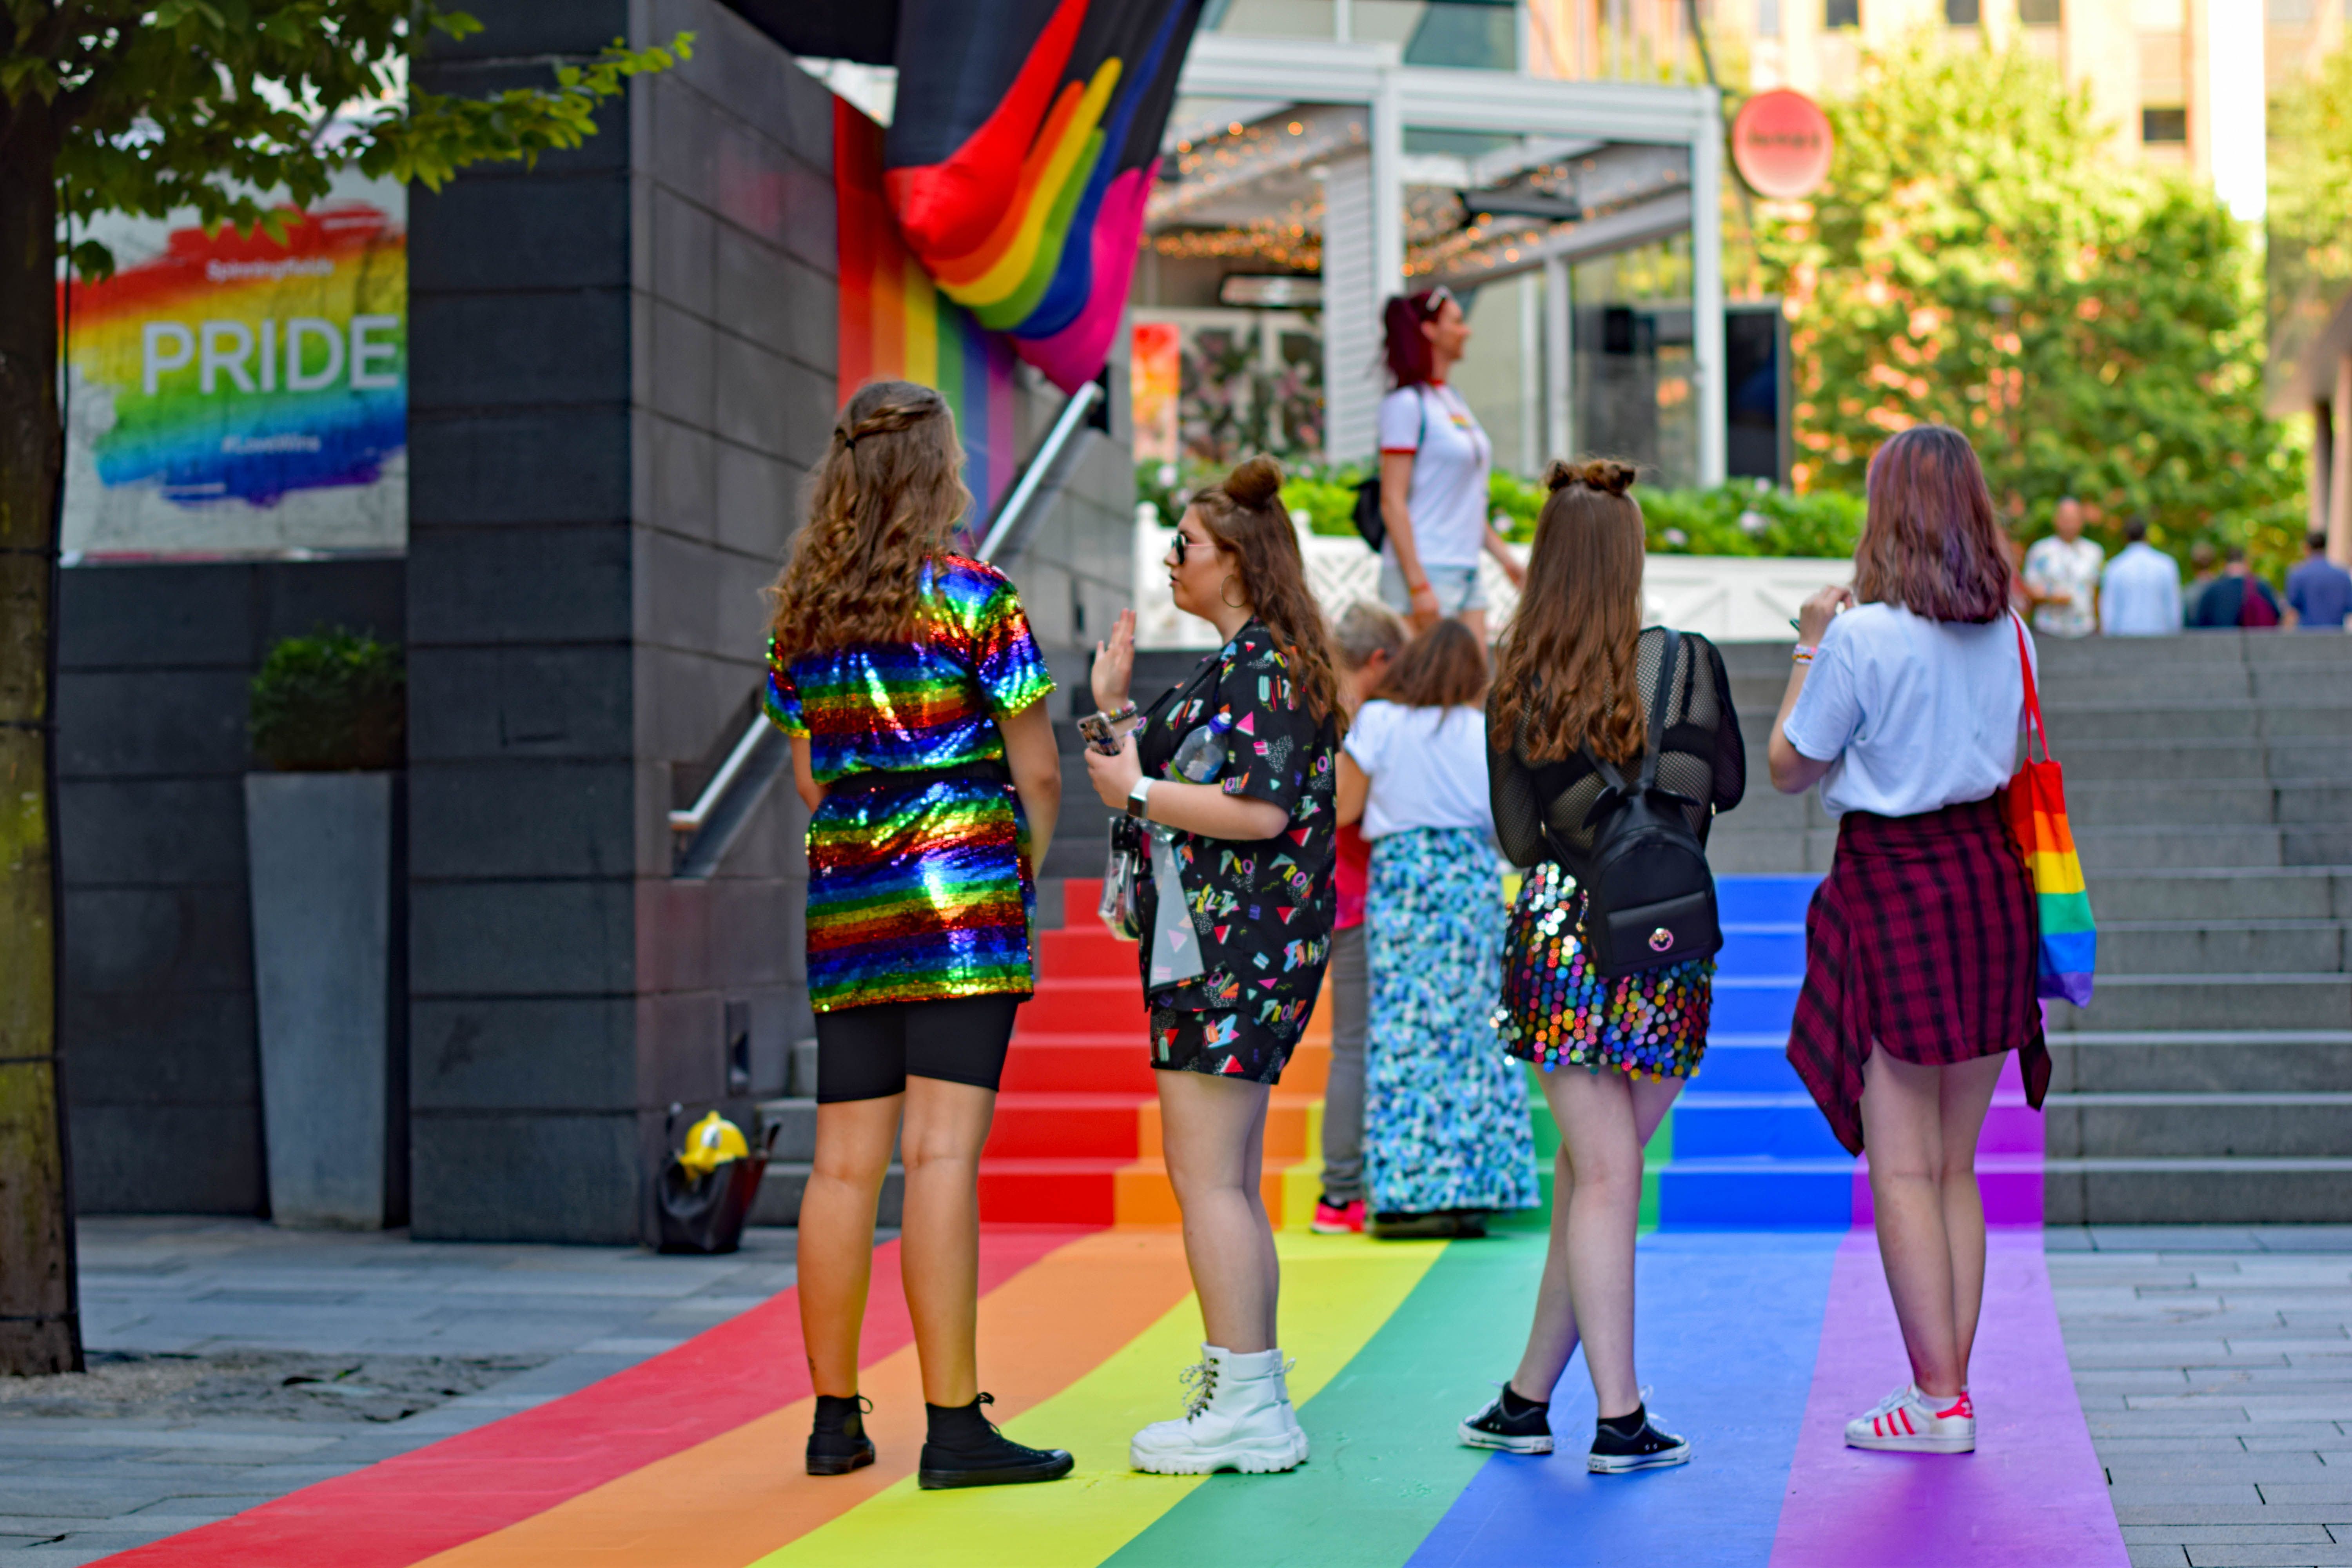 Artwork in the Spinningfields financial center  of the city with young women standing on a rainbow pained pavement